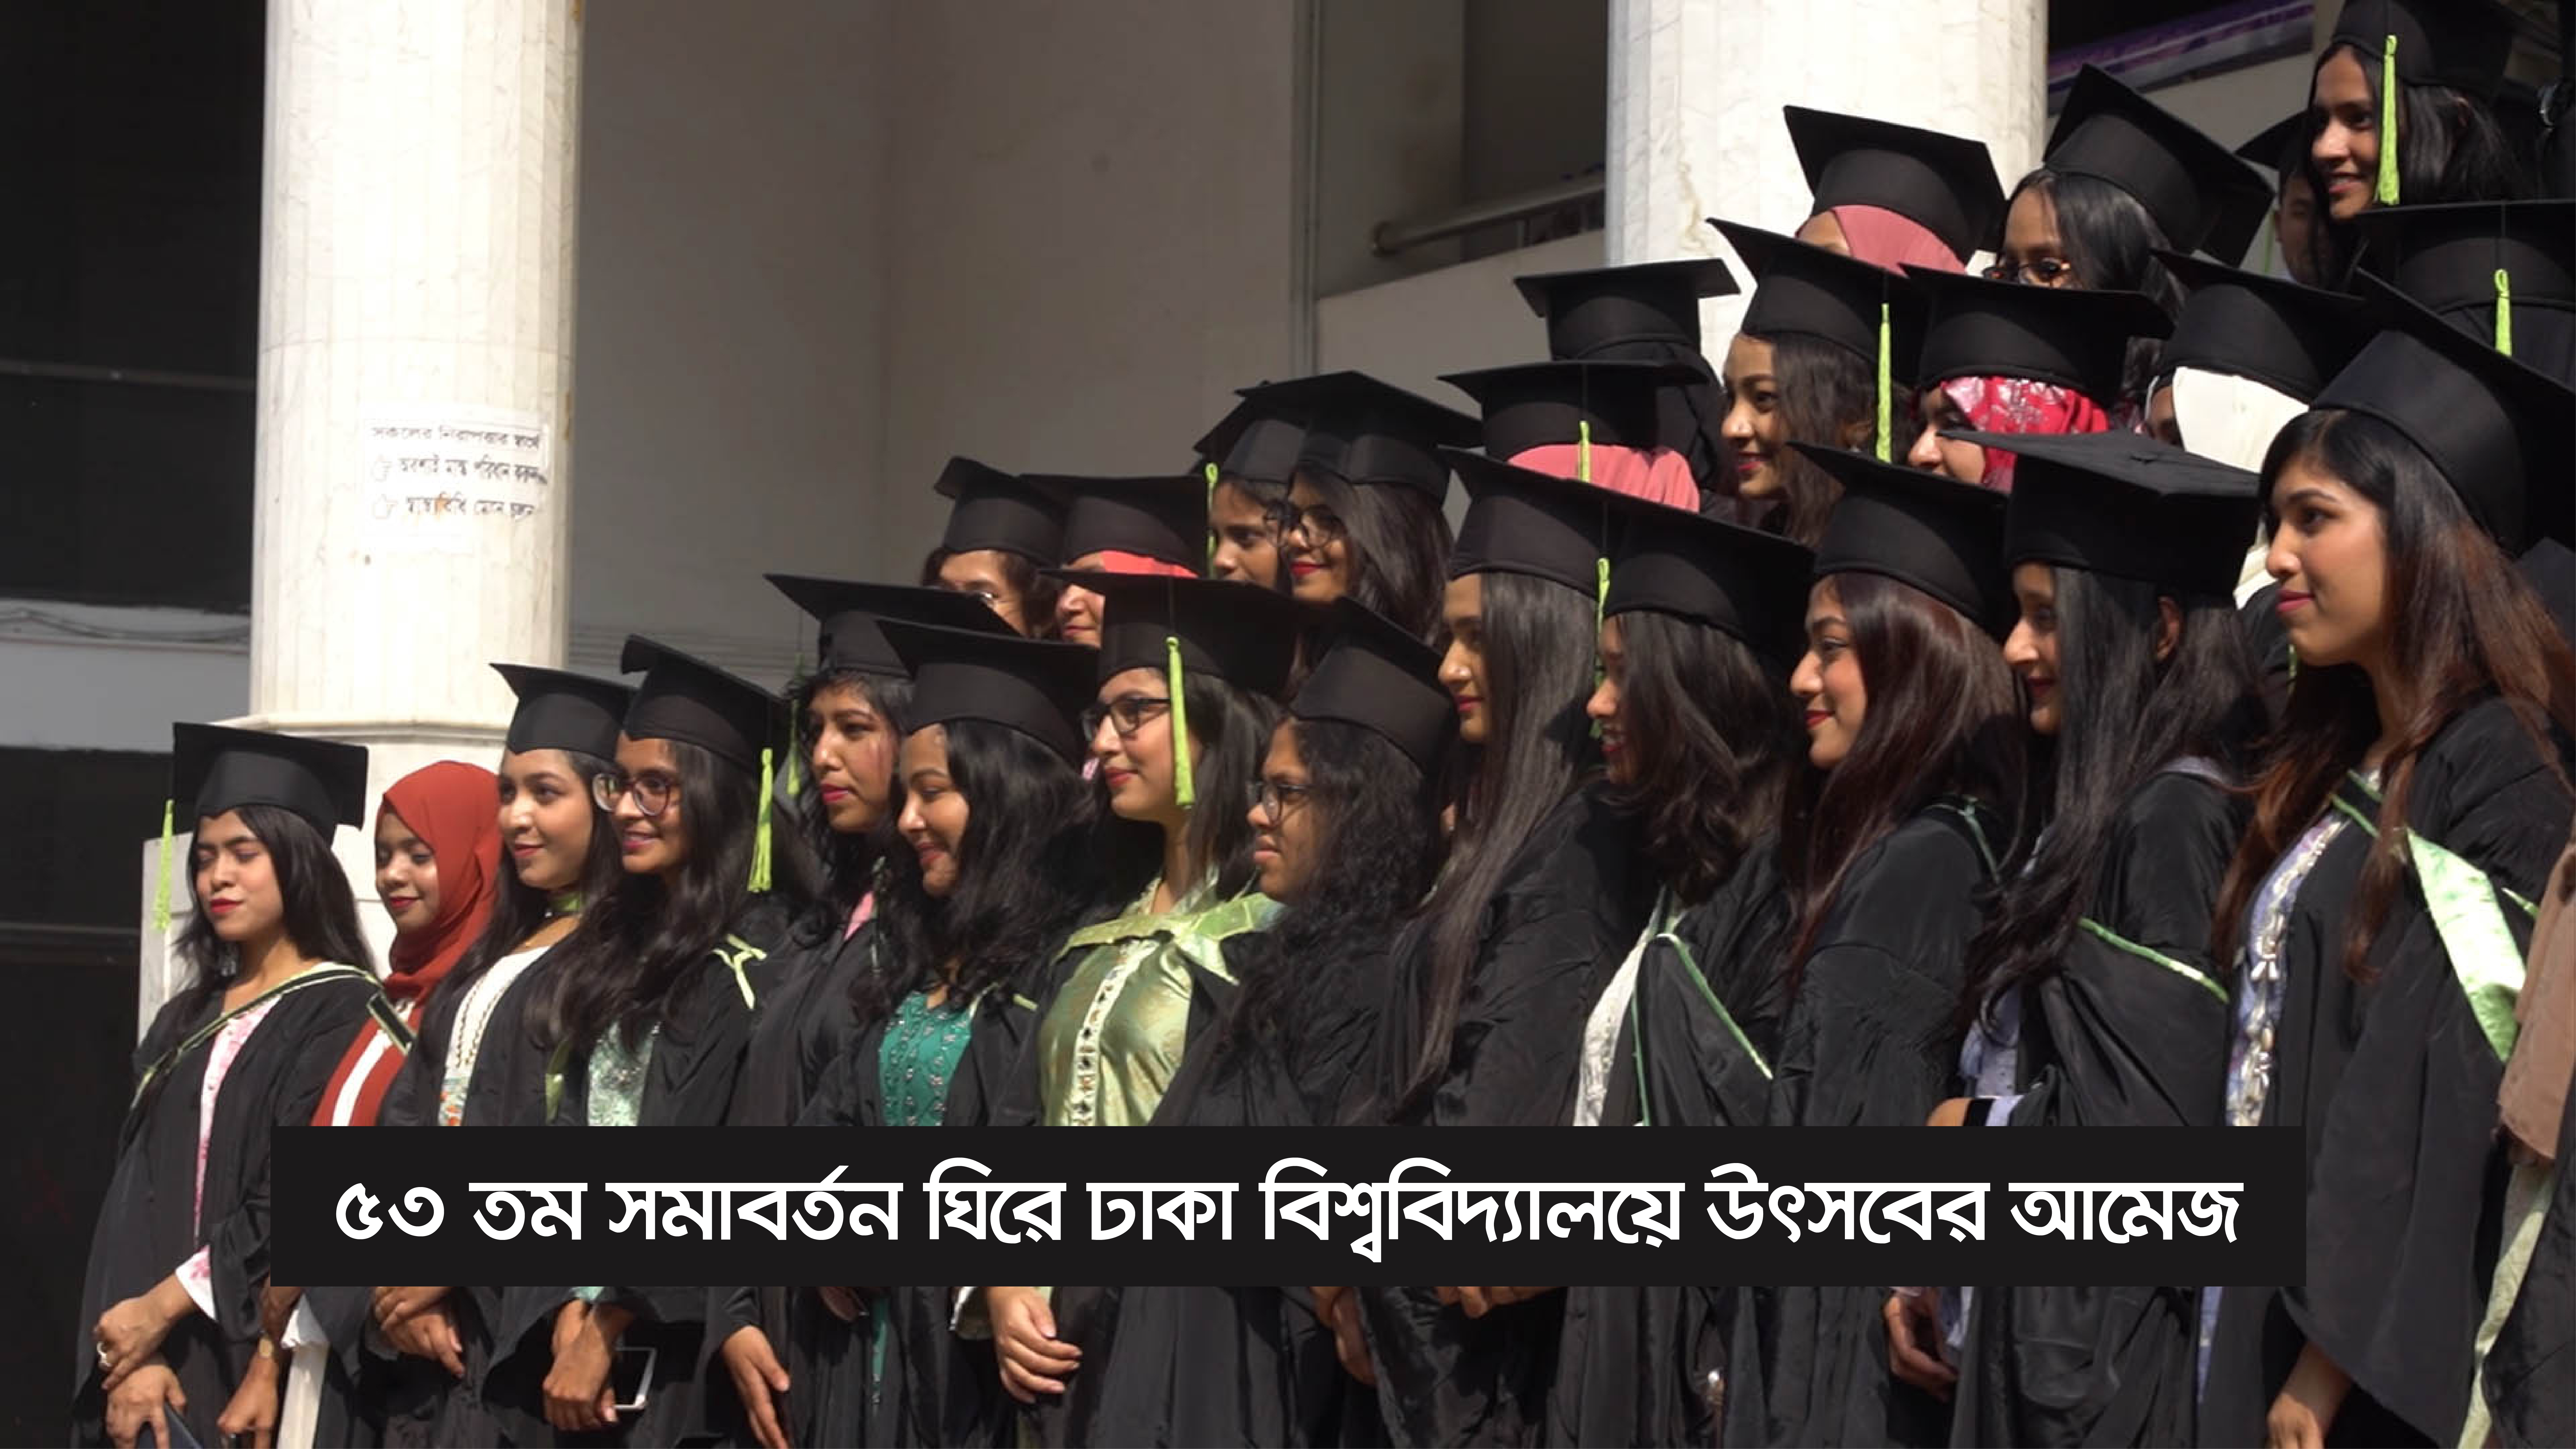 Festive mood at Dhaka University on the occasion of 53rd convocation